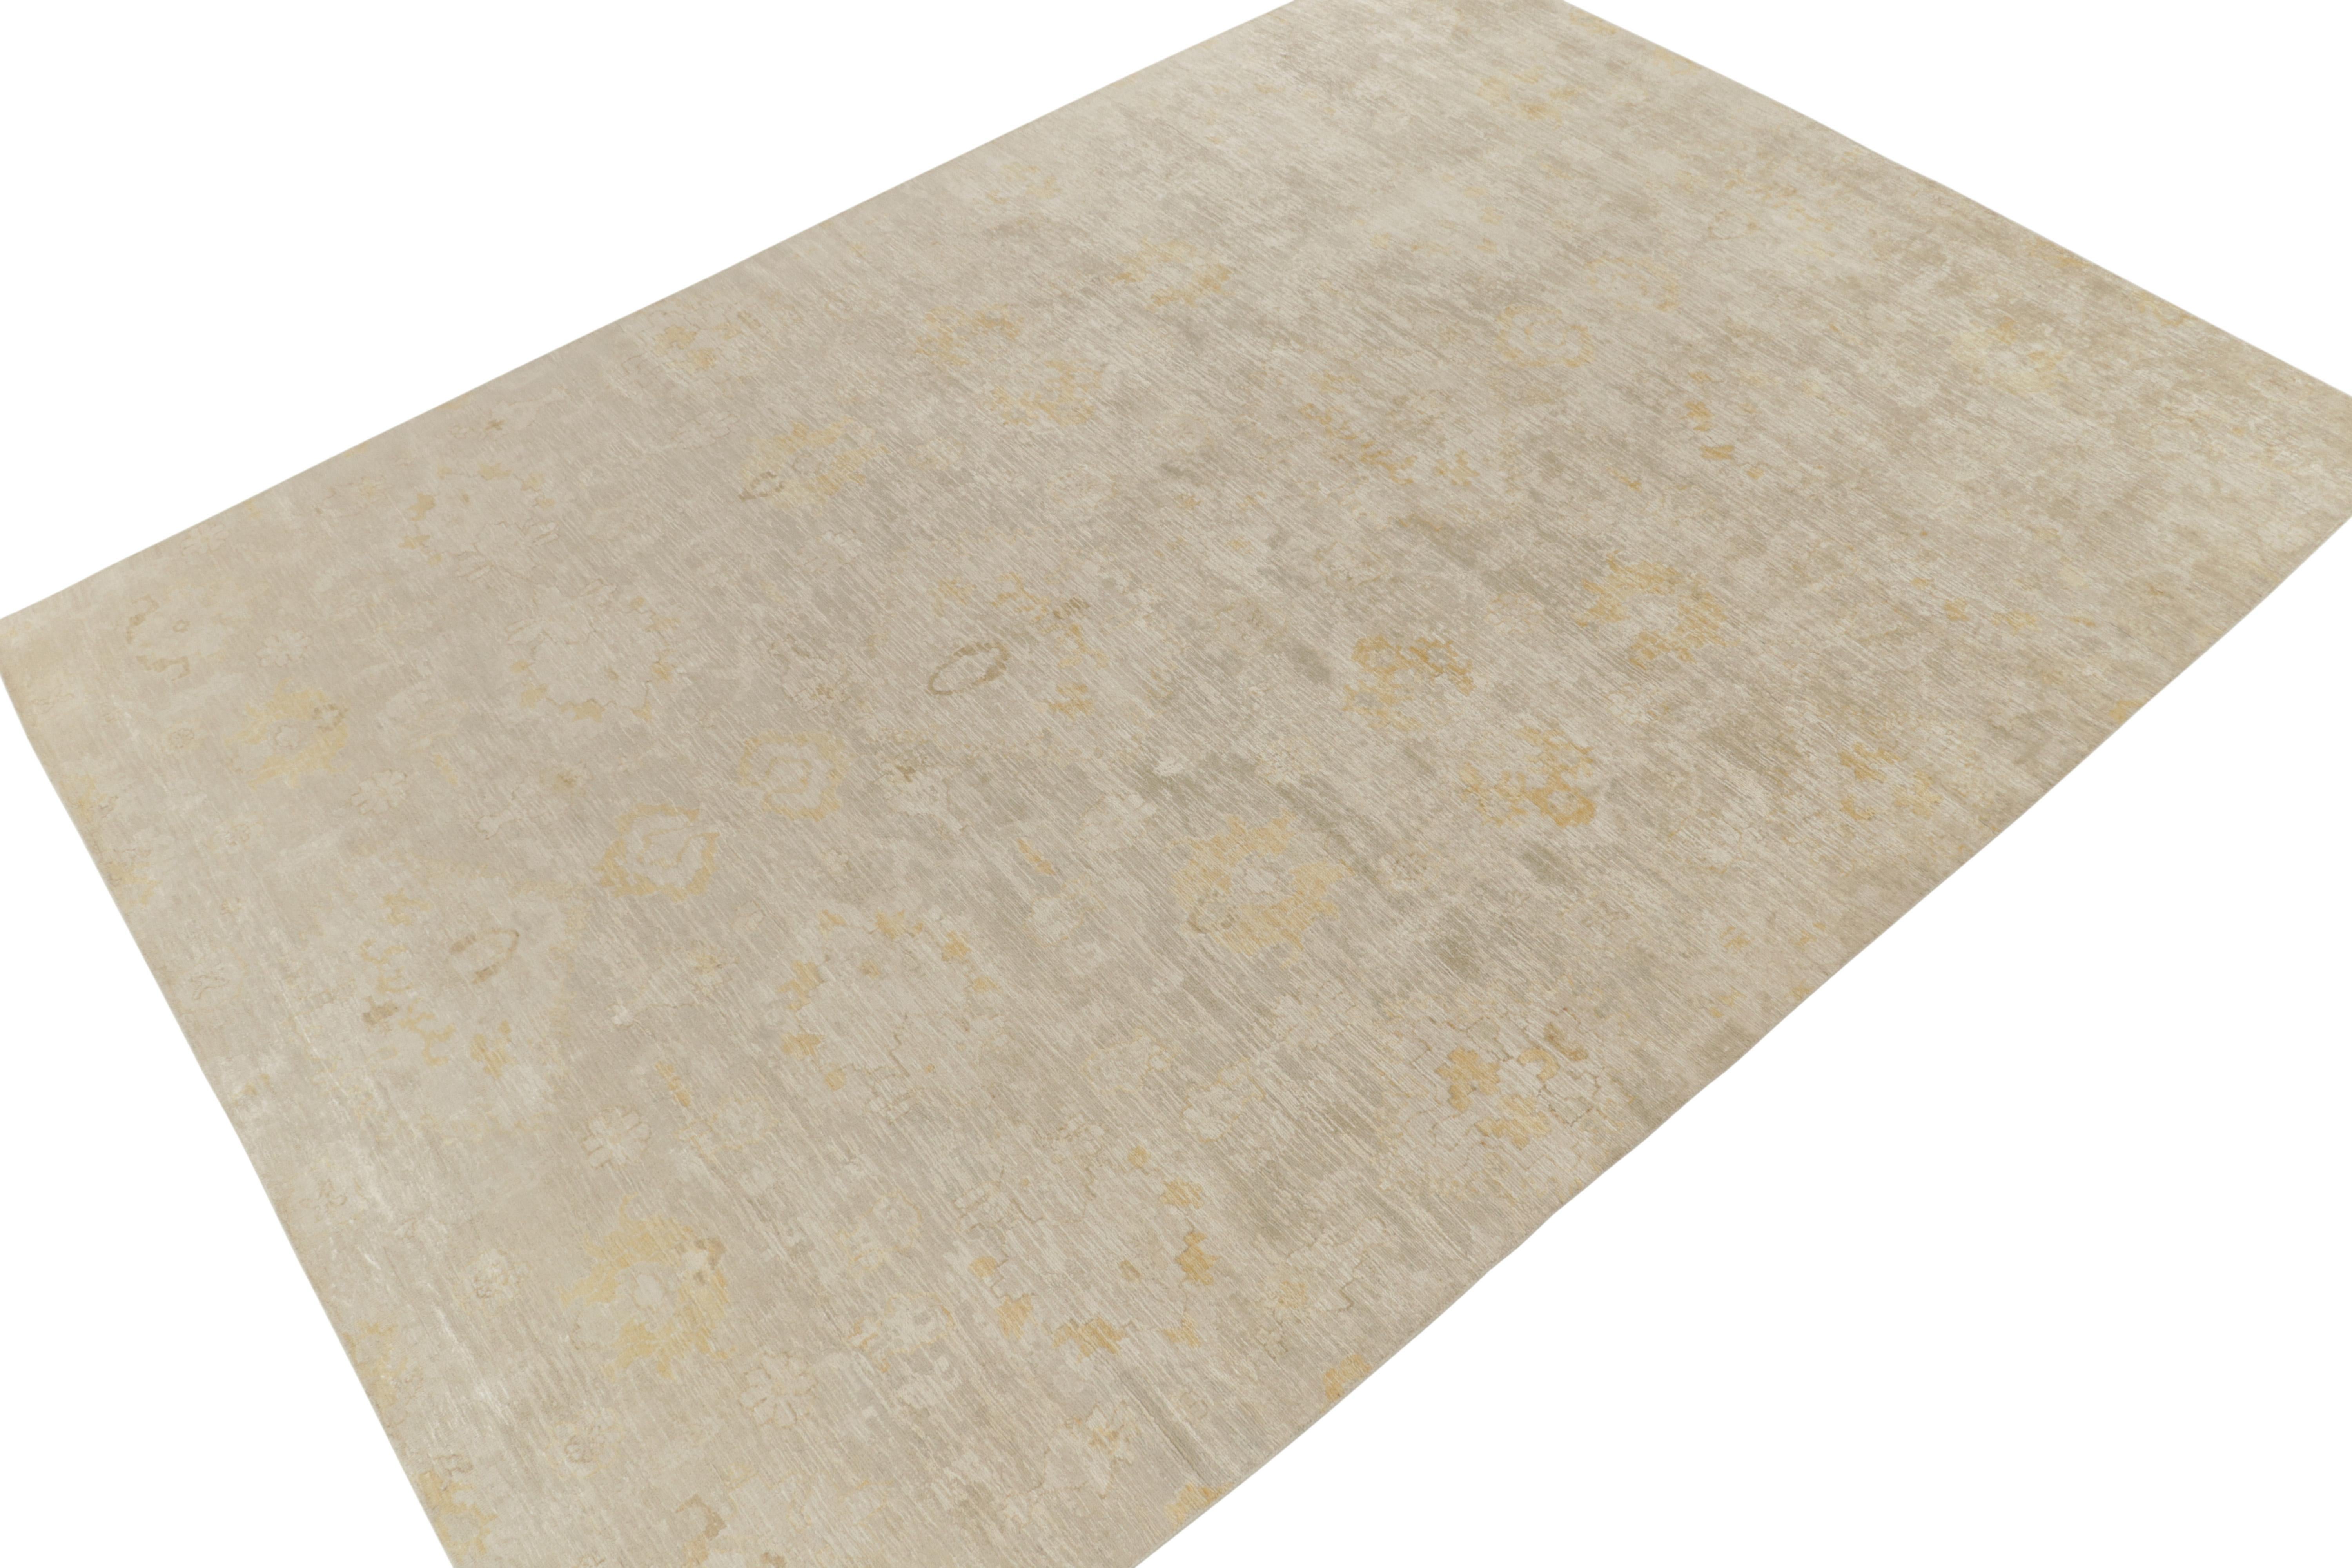 Hand-knotted in fine silk, a 10x14 abstract piece from Rug & Kilim’s contemporary selections uniquely inspired by classic floral pattersn. The alluring drawing presents itself with ivory and golden-yellow tones together to bring out a textural,